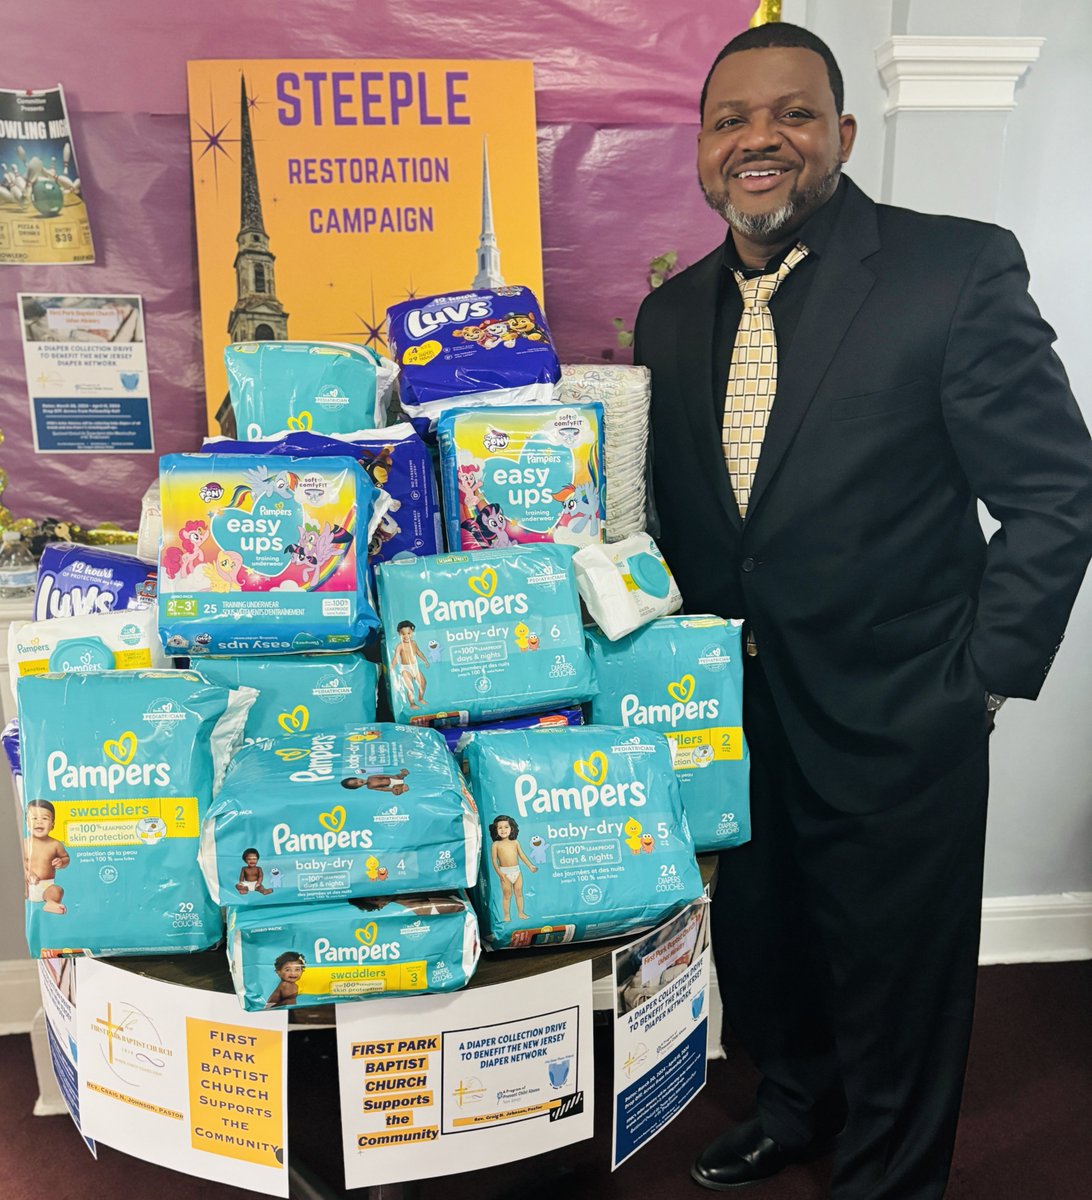 Thank you to Rev. Craig N. Johnson and parishioners of First Park Baptist Church in Plainfield for conducting a diaper drive for our NJ Diaper Network to support local families in need. #diaperneed #PartnersInPrevention #thankful